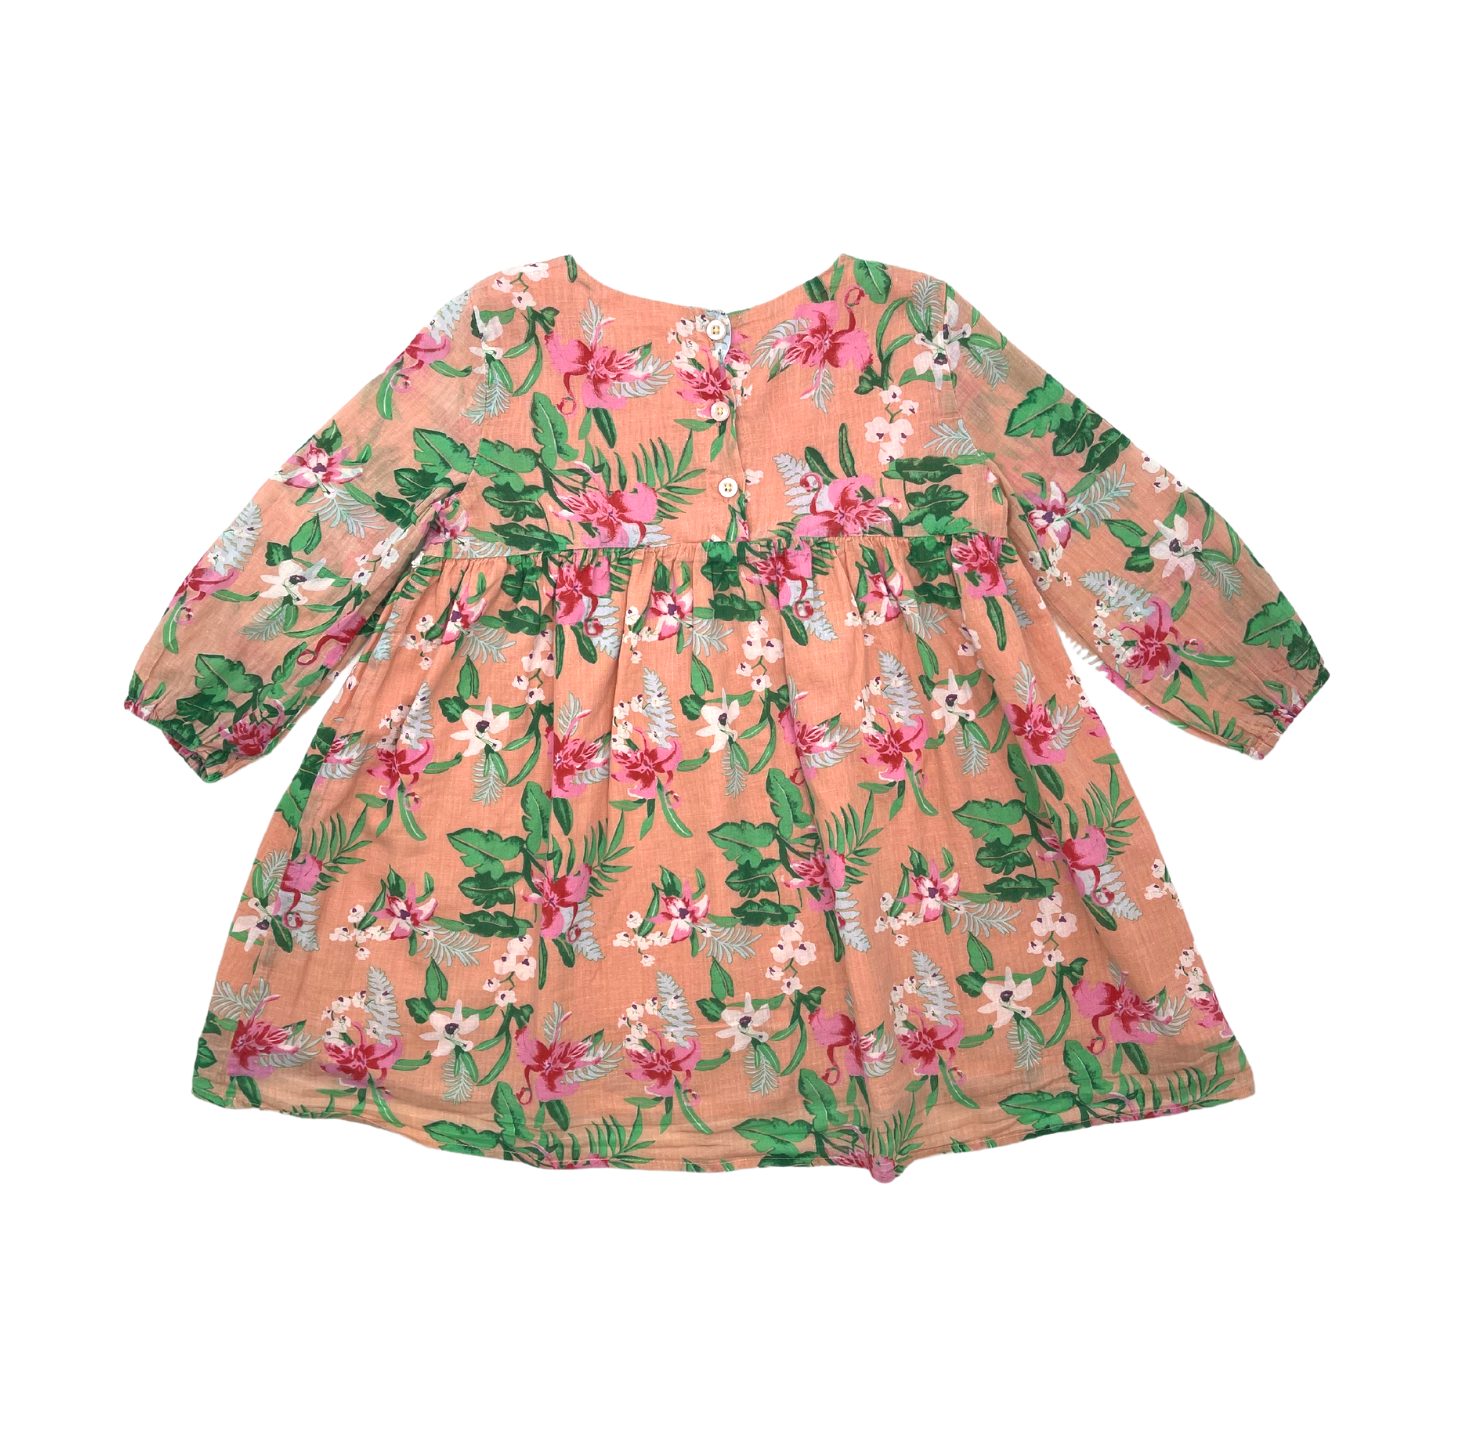 LOUISE MISHA - Pink floral dress - 3 years old